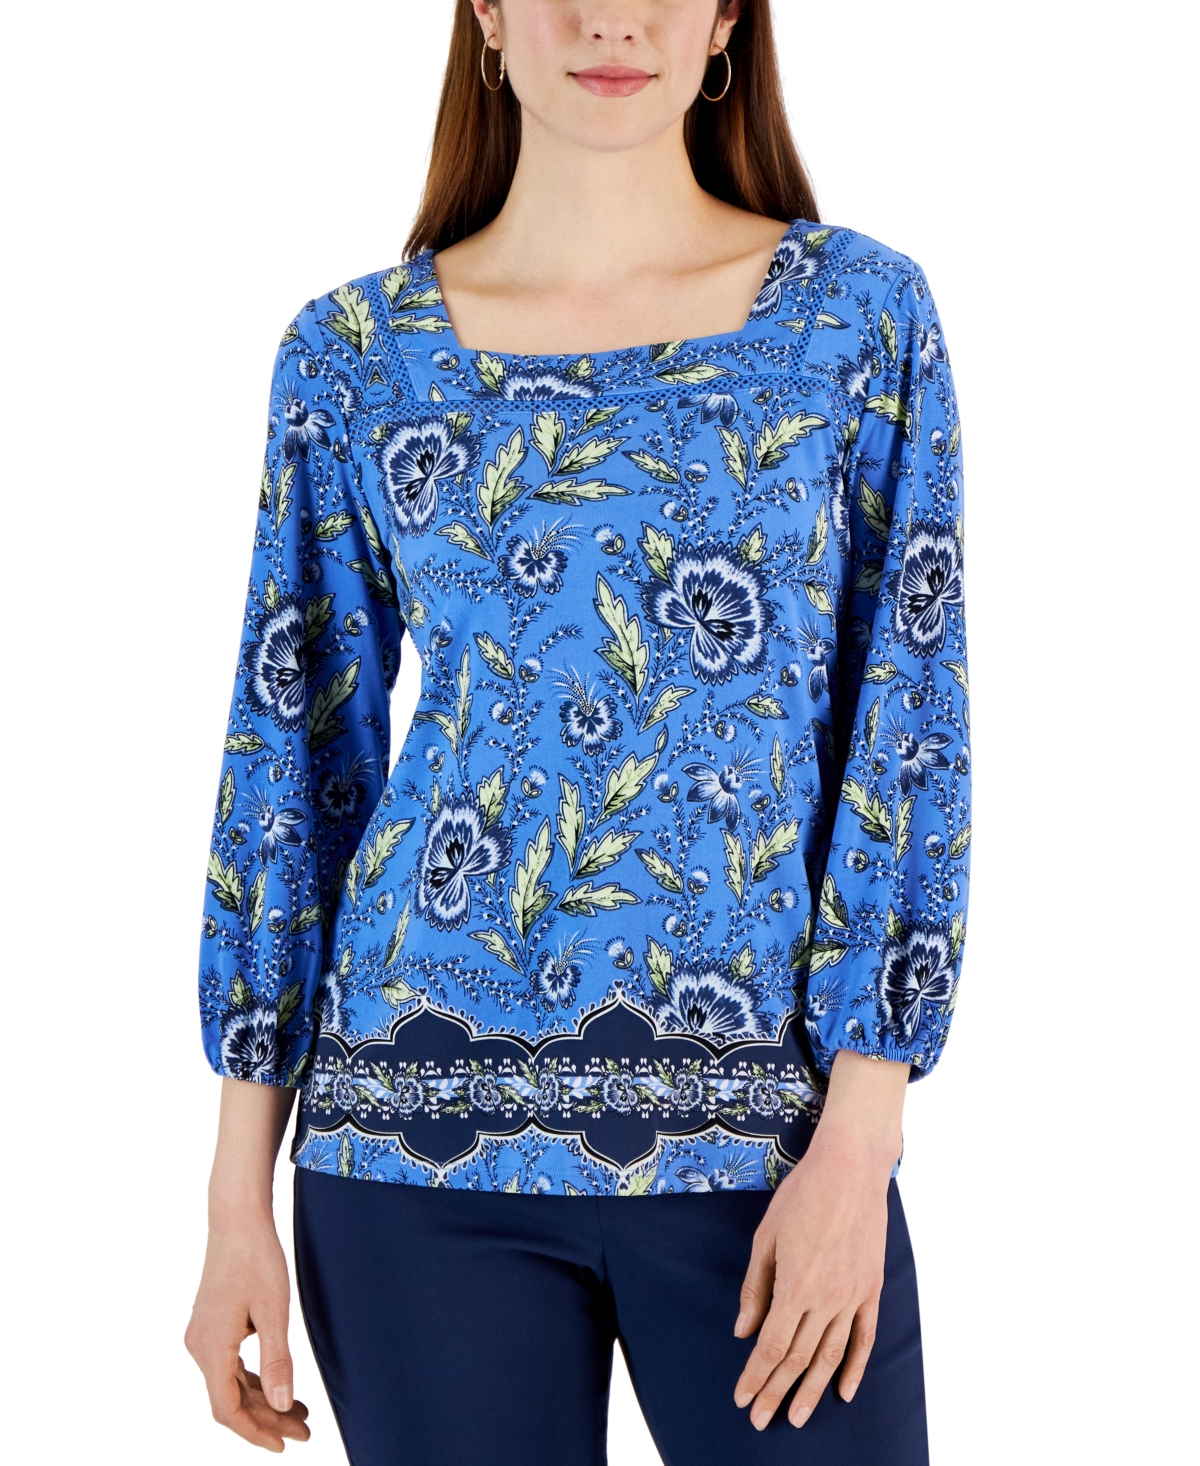 Women's Printed 3/4 Sleeve Square-Neck Top, Created for Macy's - Watery Blue Combo